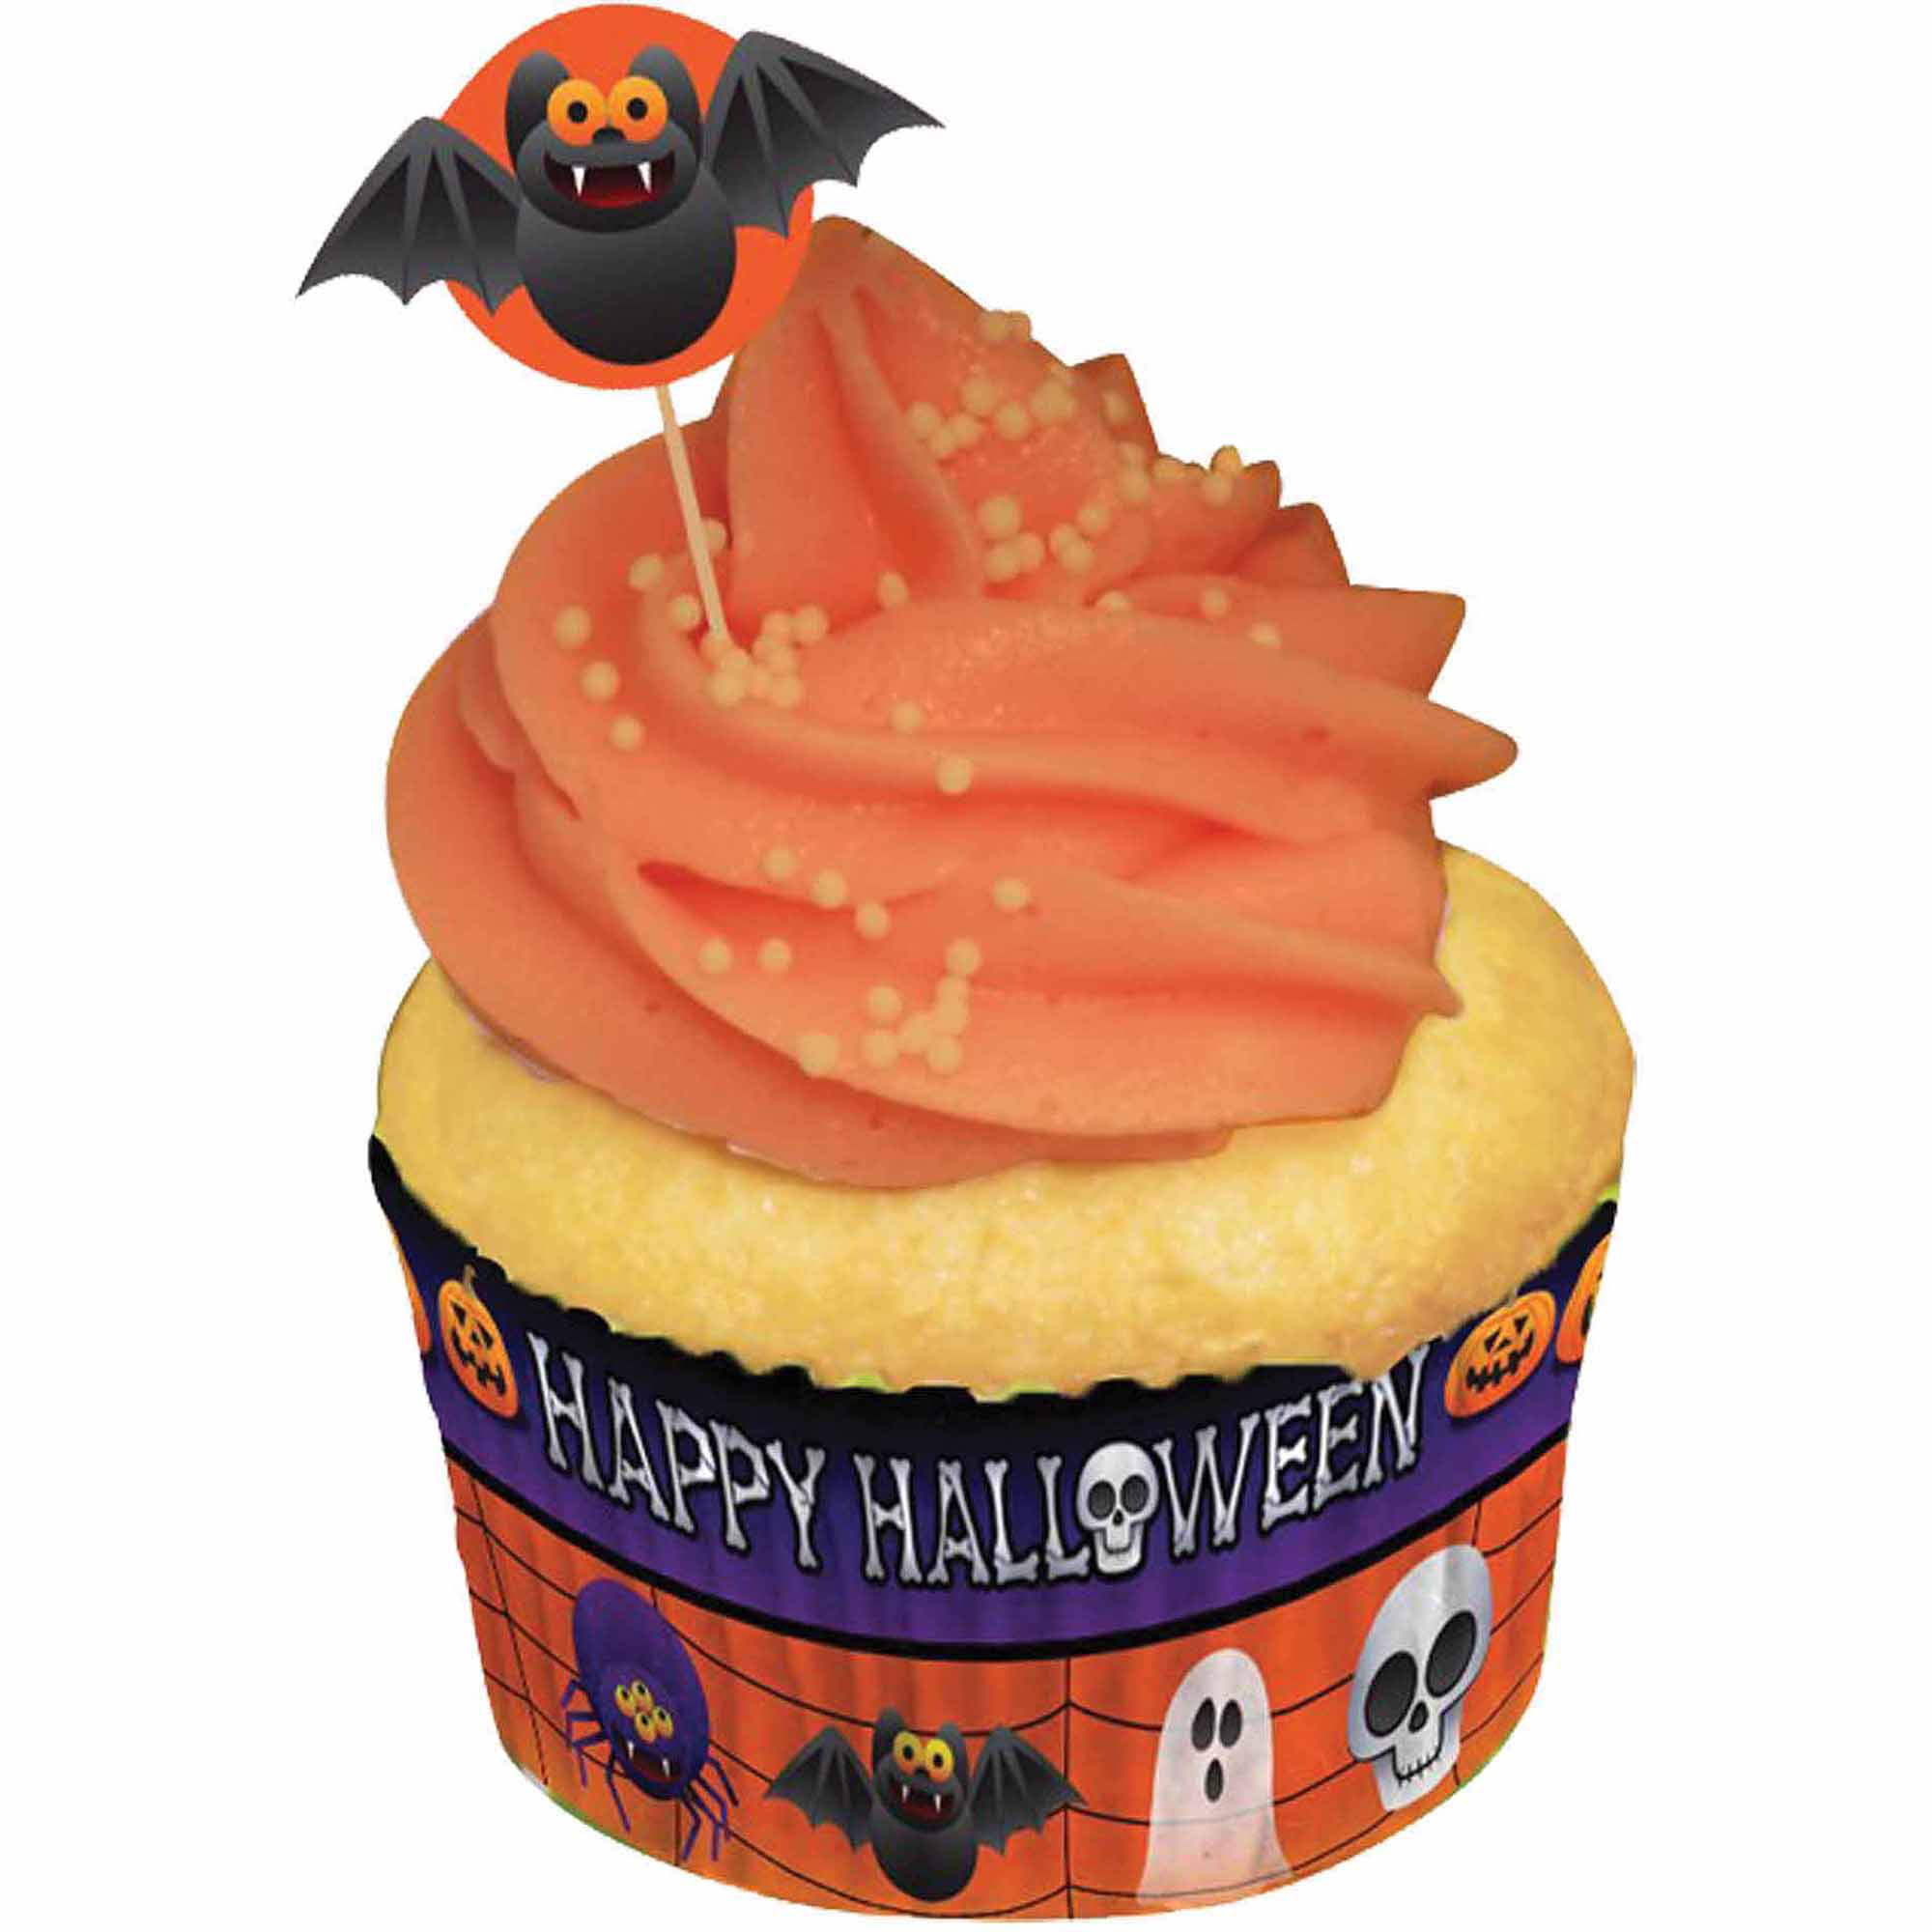 36Pcs Black Halloween Mini Paper Cake Cup Liners Baking Cupcake Cases Muffin NEW 